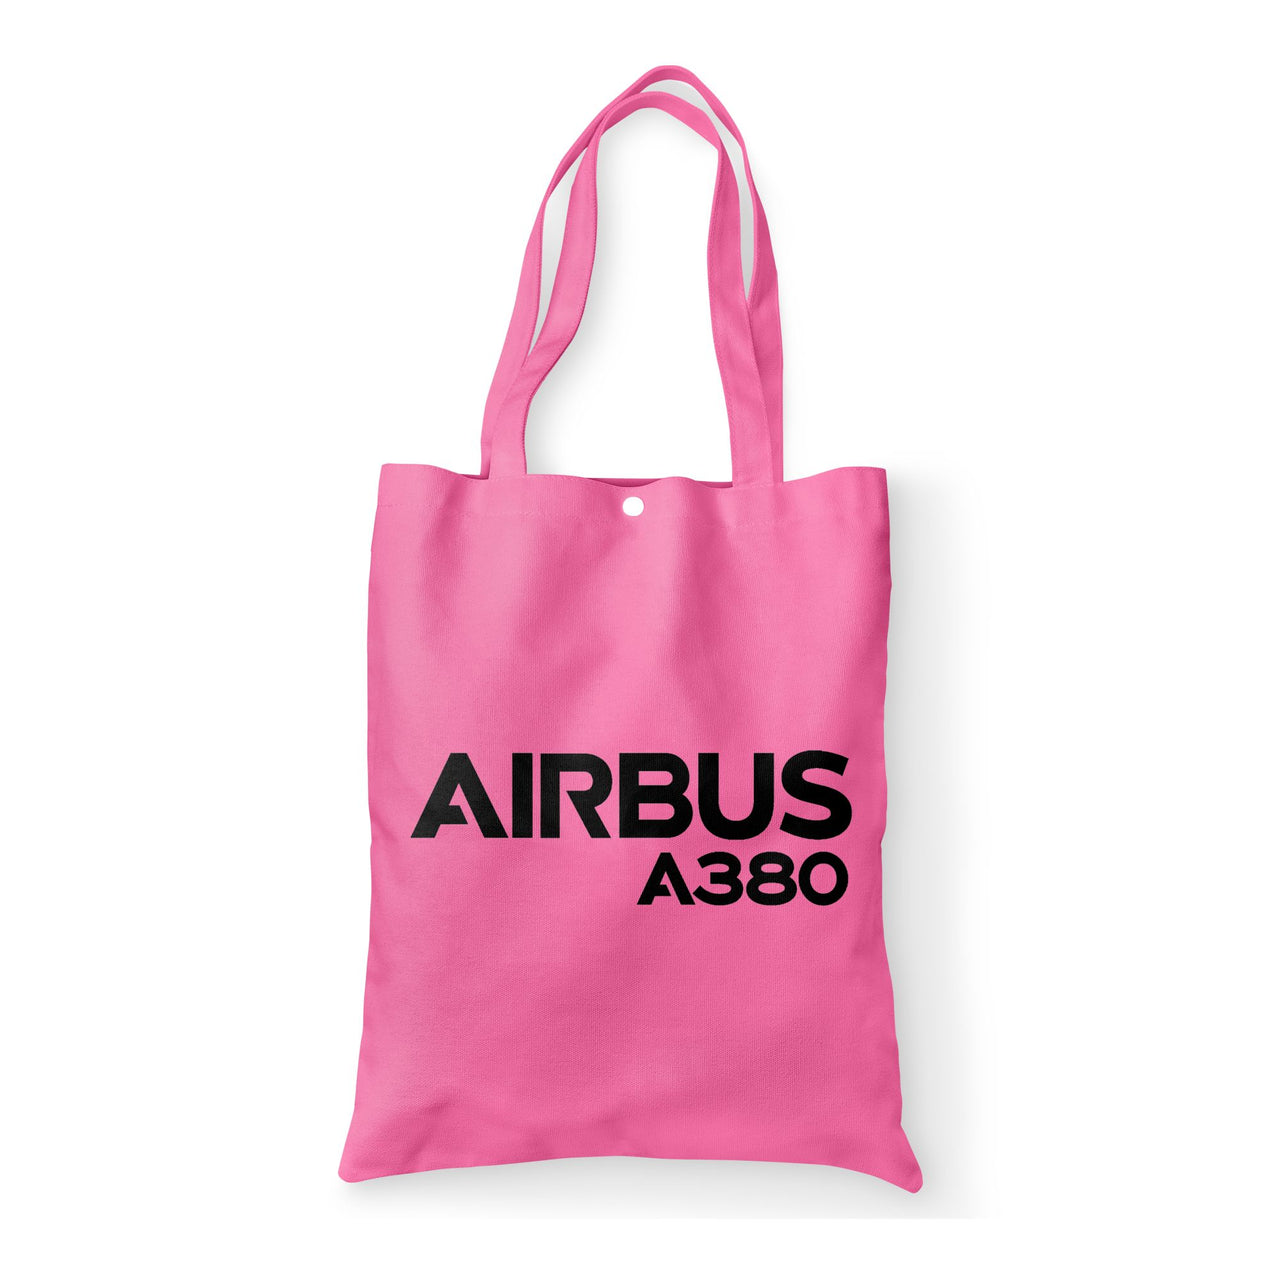 Airbus A380 & Text Designed Tote Bags